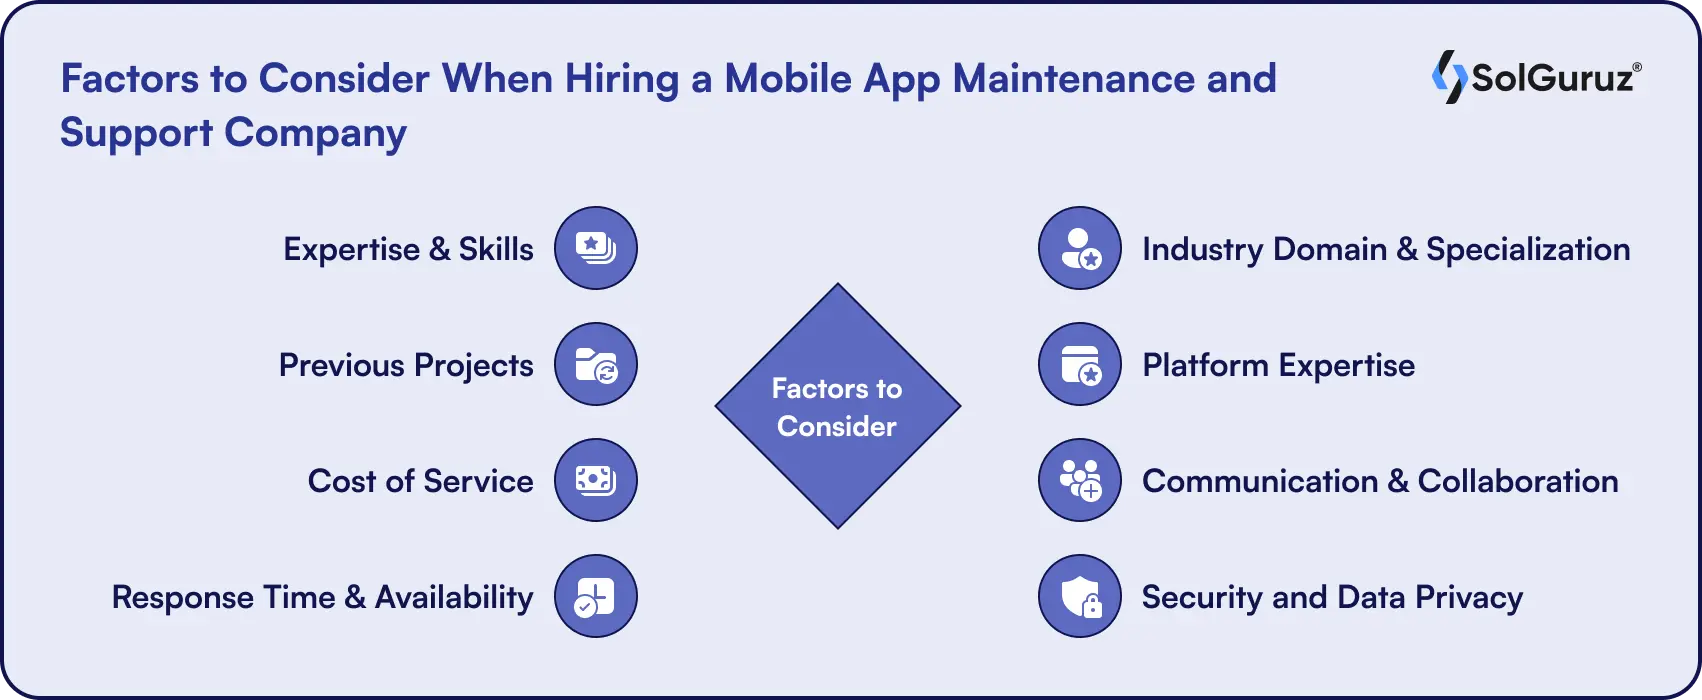 Factors to Consider When Hiring a Mobile App Maintenance and Support Company